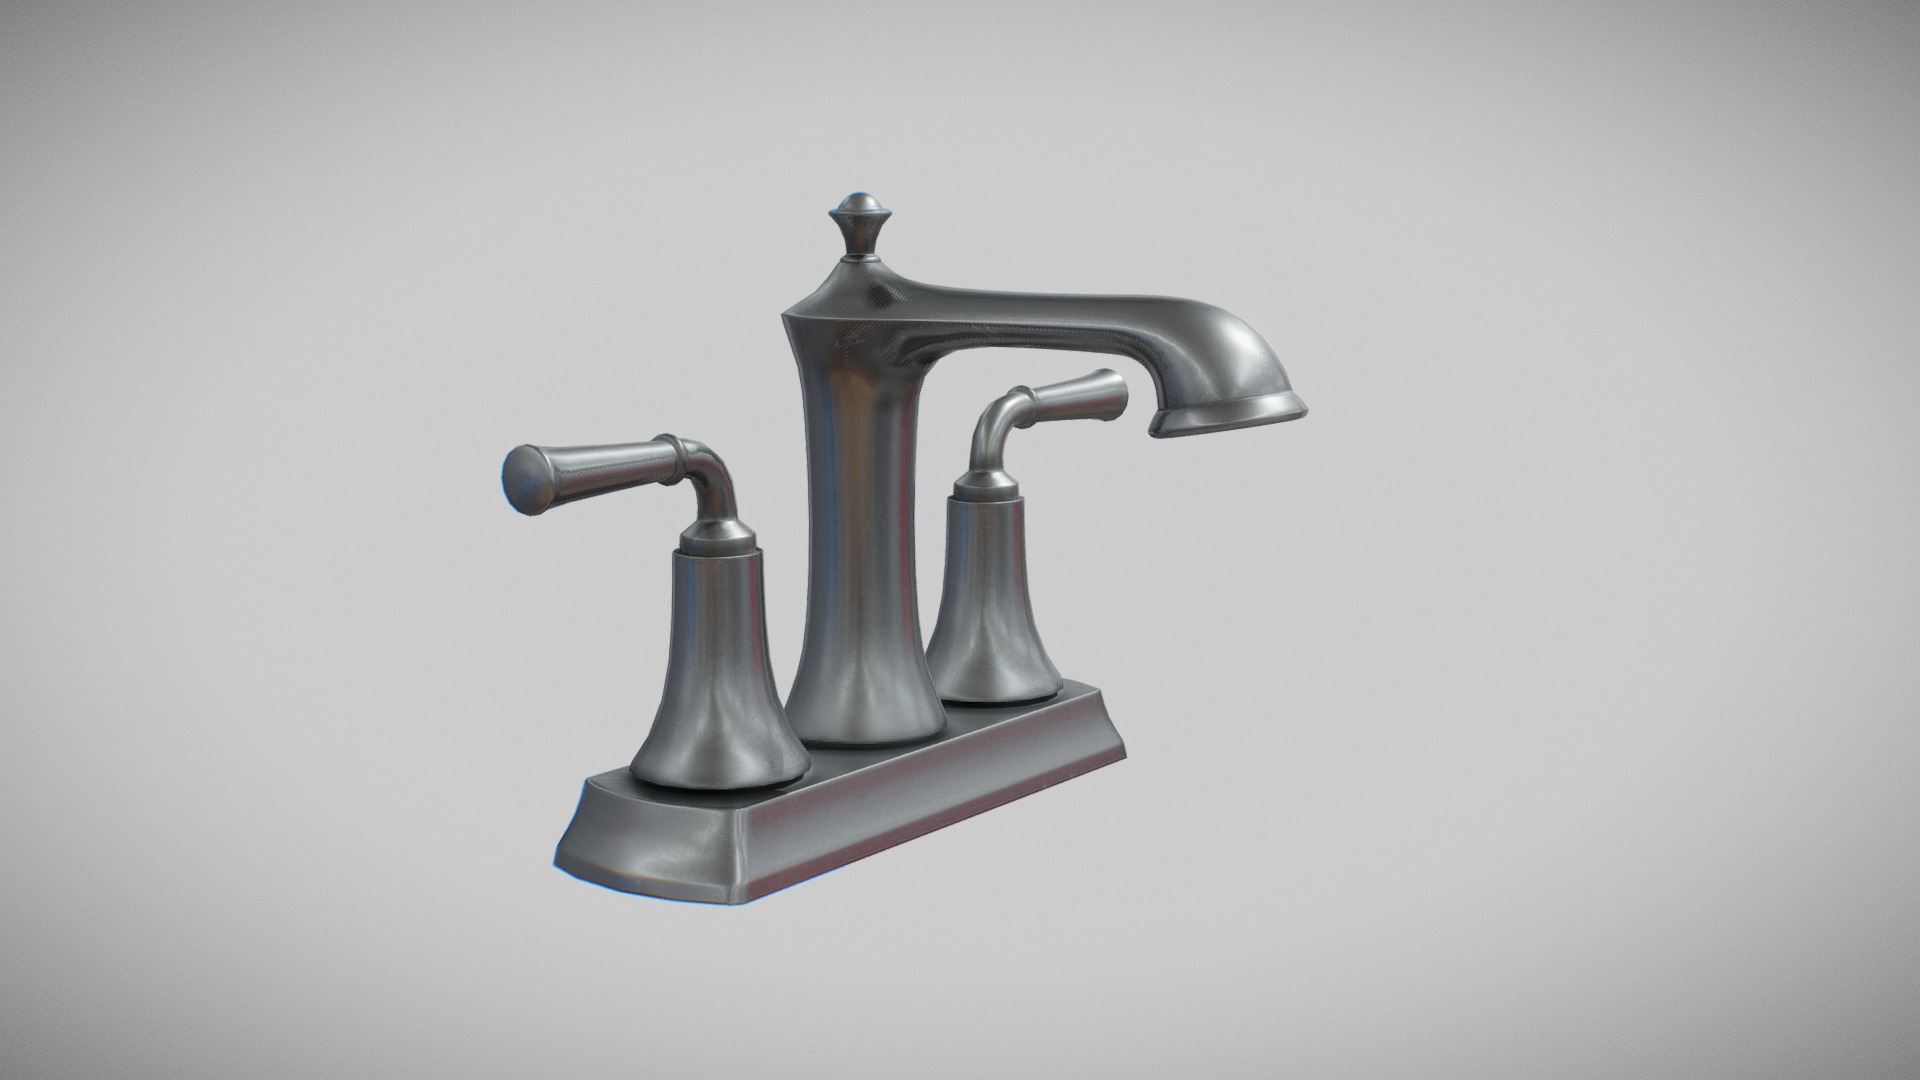 3D model Used Modern Faucet 1 - This is a 3D model of the Used Modern Faucet 1. The 3D model is about a silver and gold faucet.